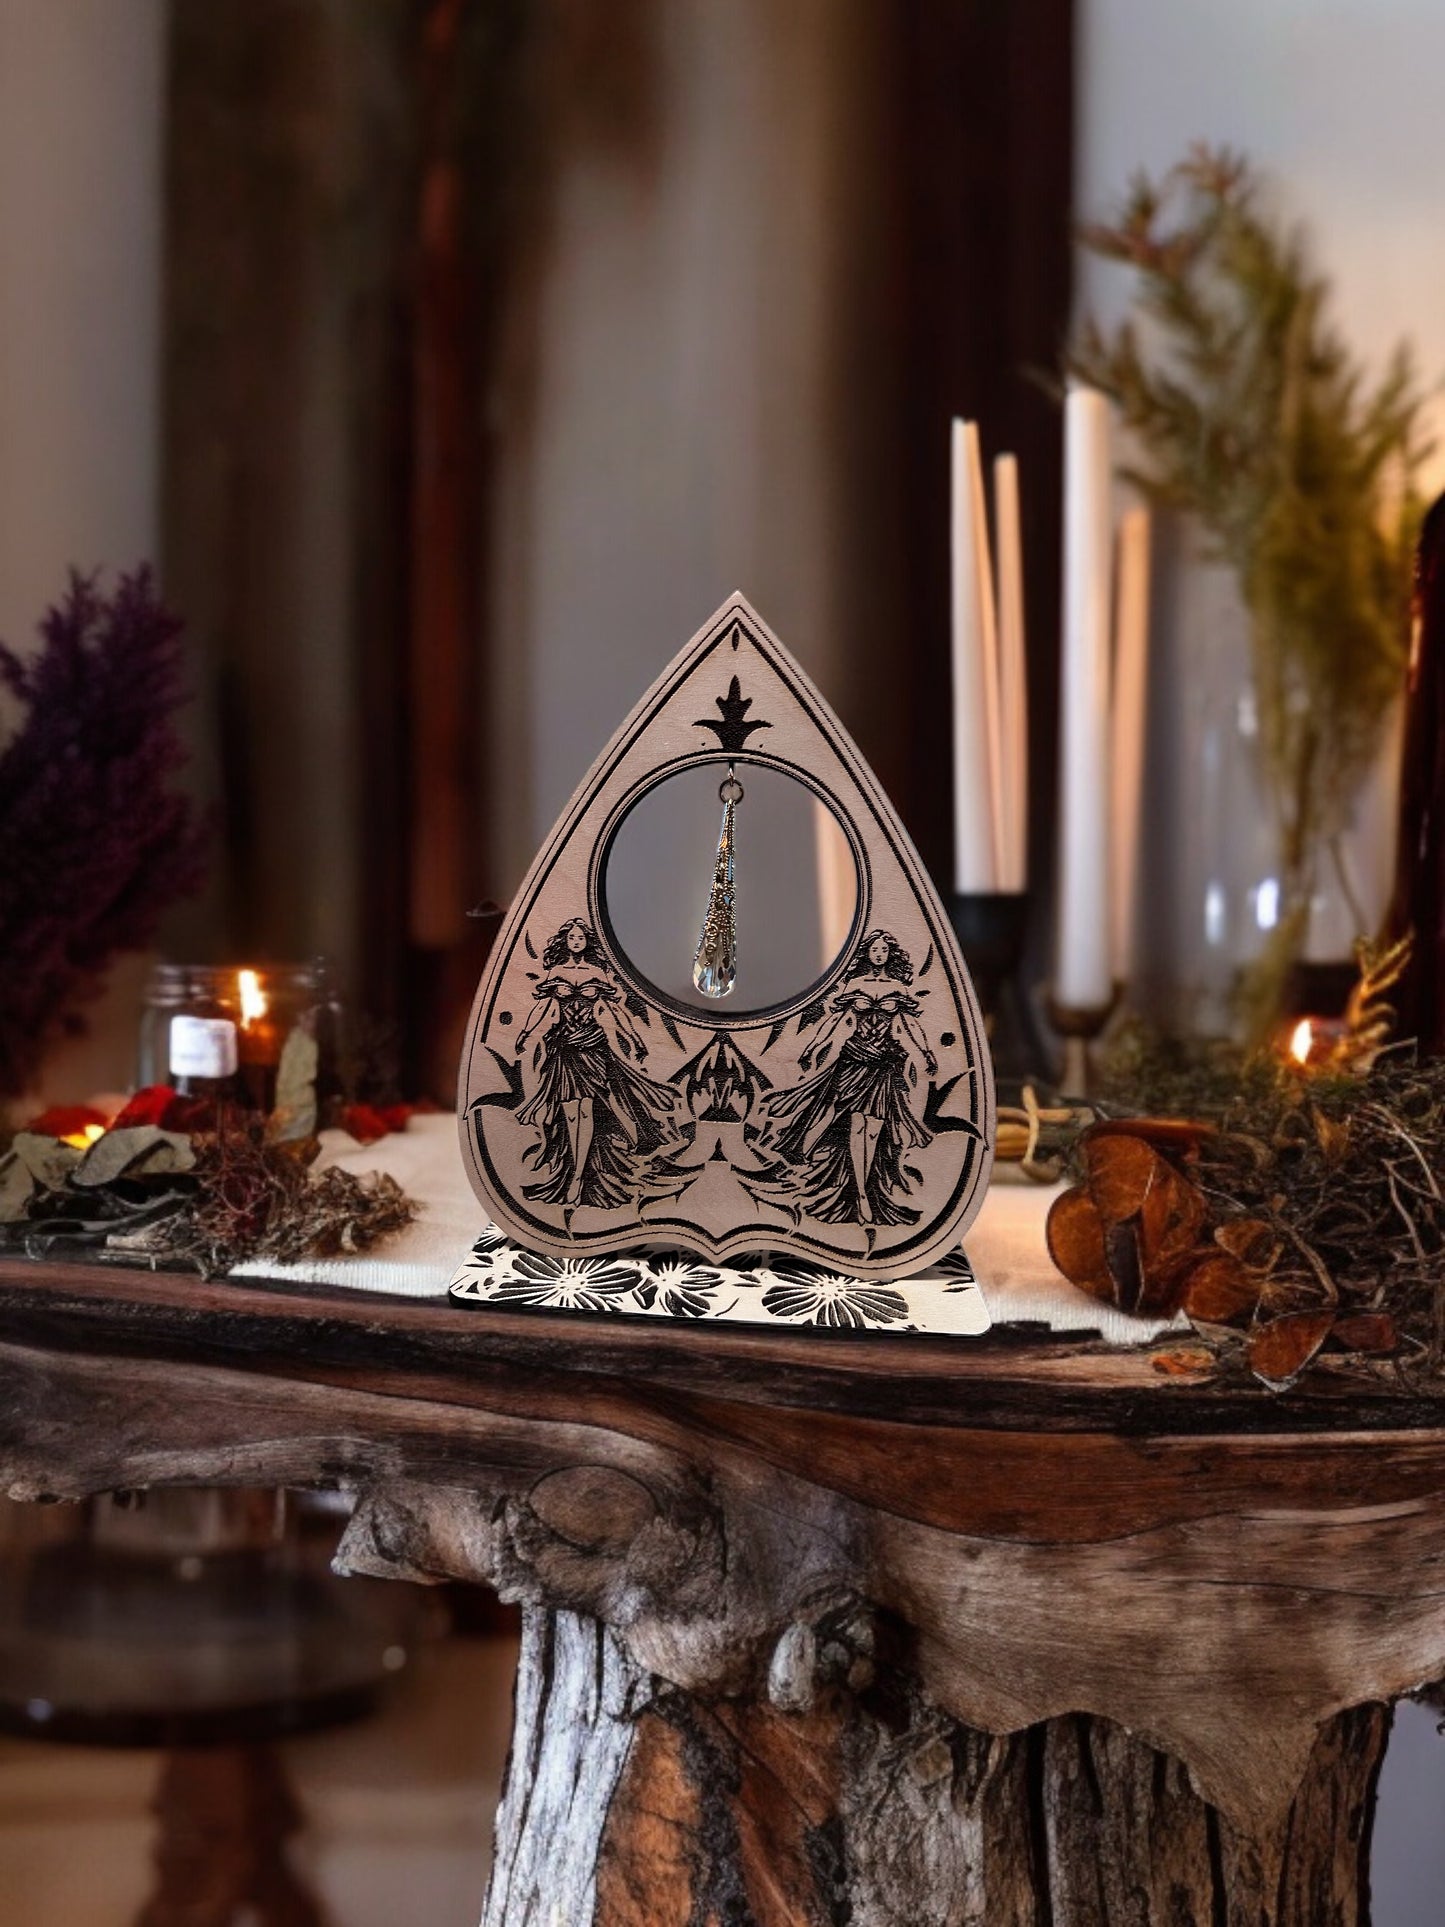 The White Lady Tabletop Planchette